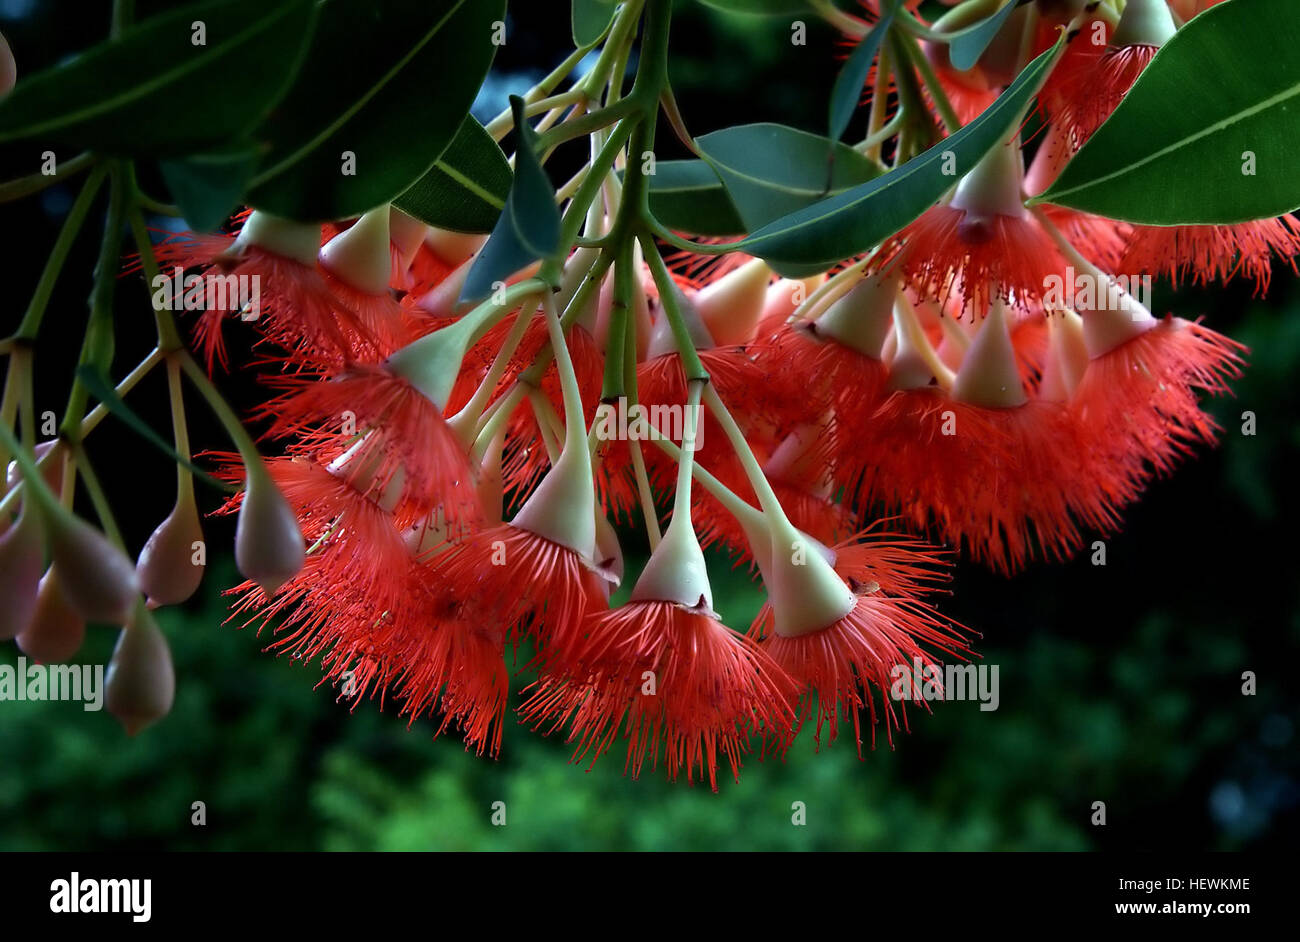 Corymbia ficifolia or the red flowering gum also known as Albany red flowering gum (previously known as Eucalyptus ficifolia) is one of the most commonly planted ornamental trees in the broader eucalyptus family. Stock Photo